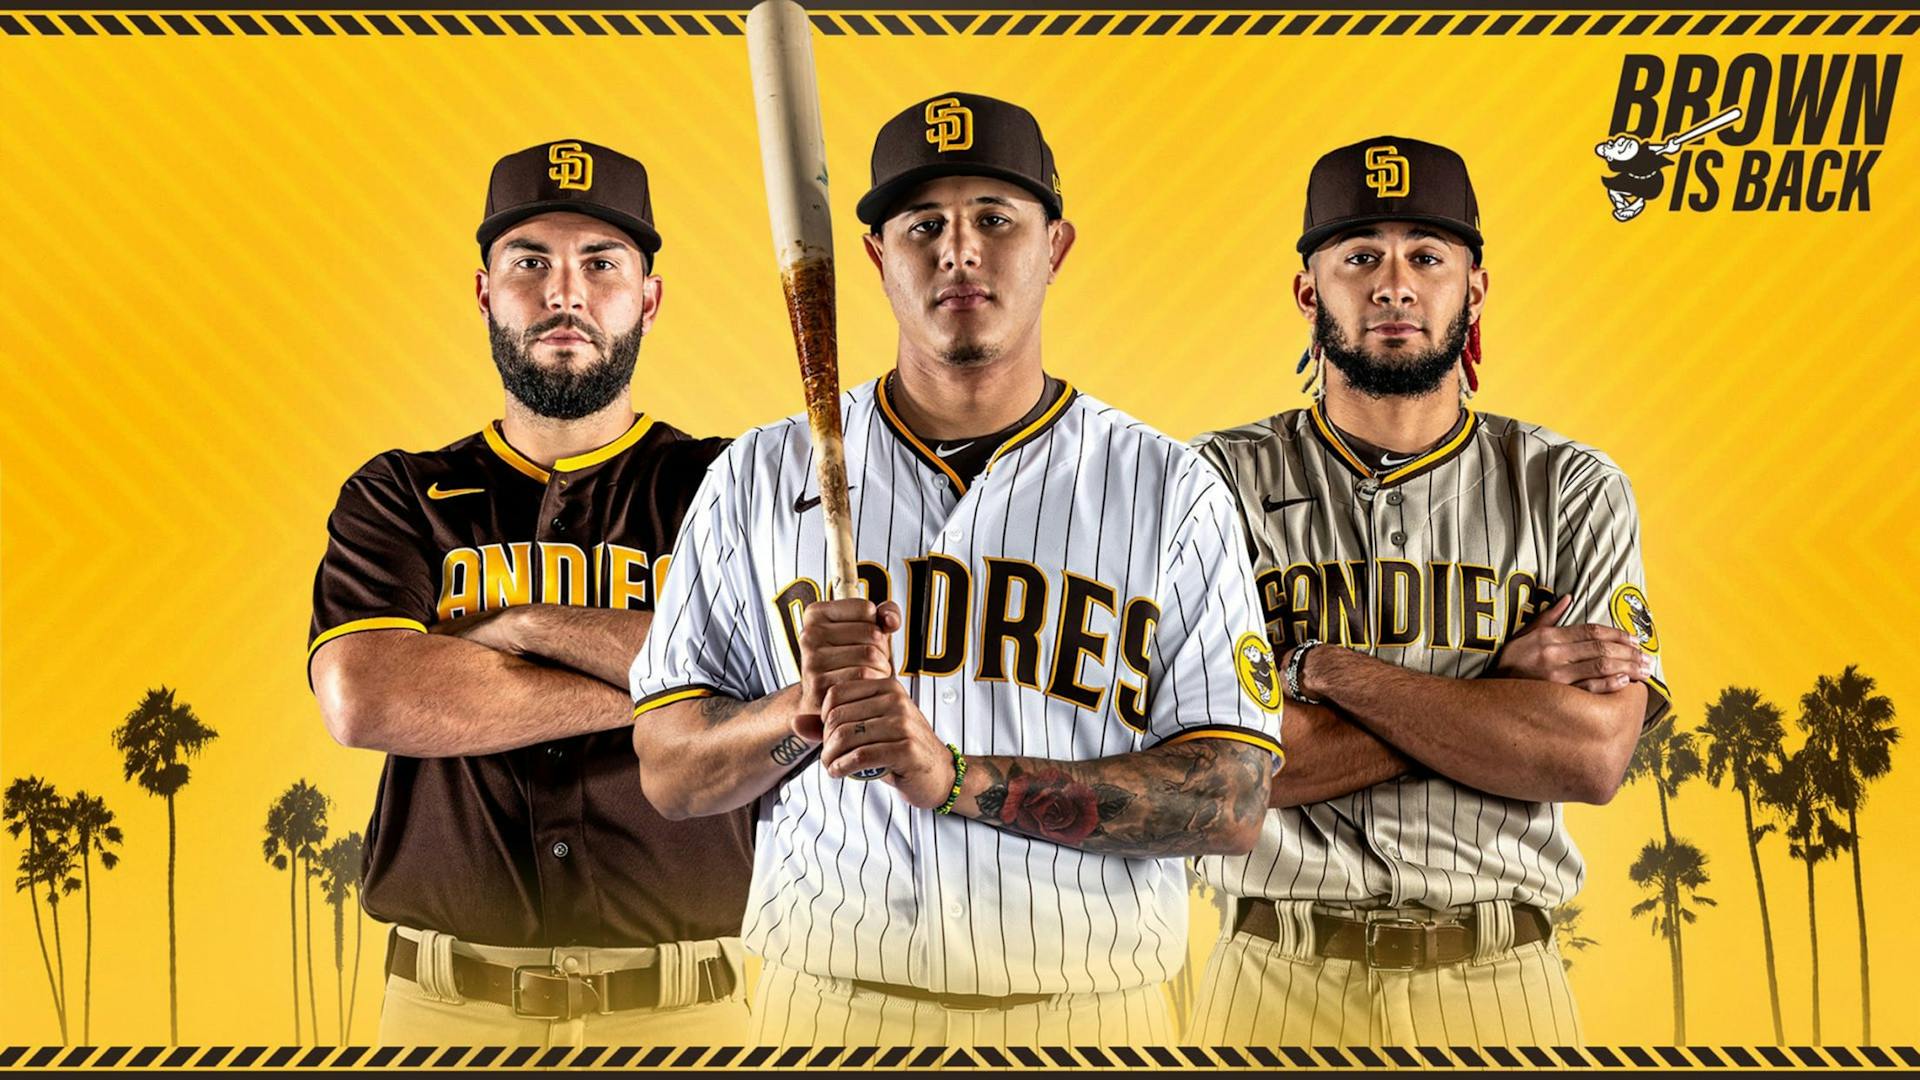 Padres go back to original colors for new uniforms, aim to also change team